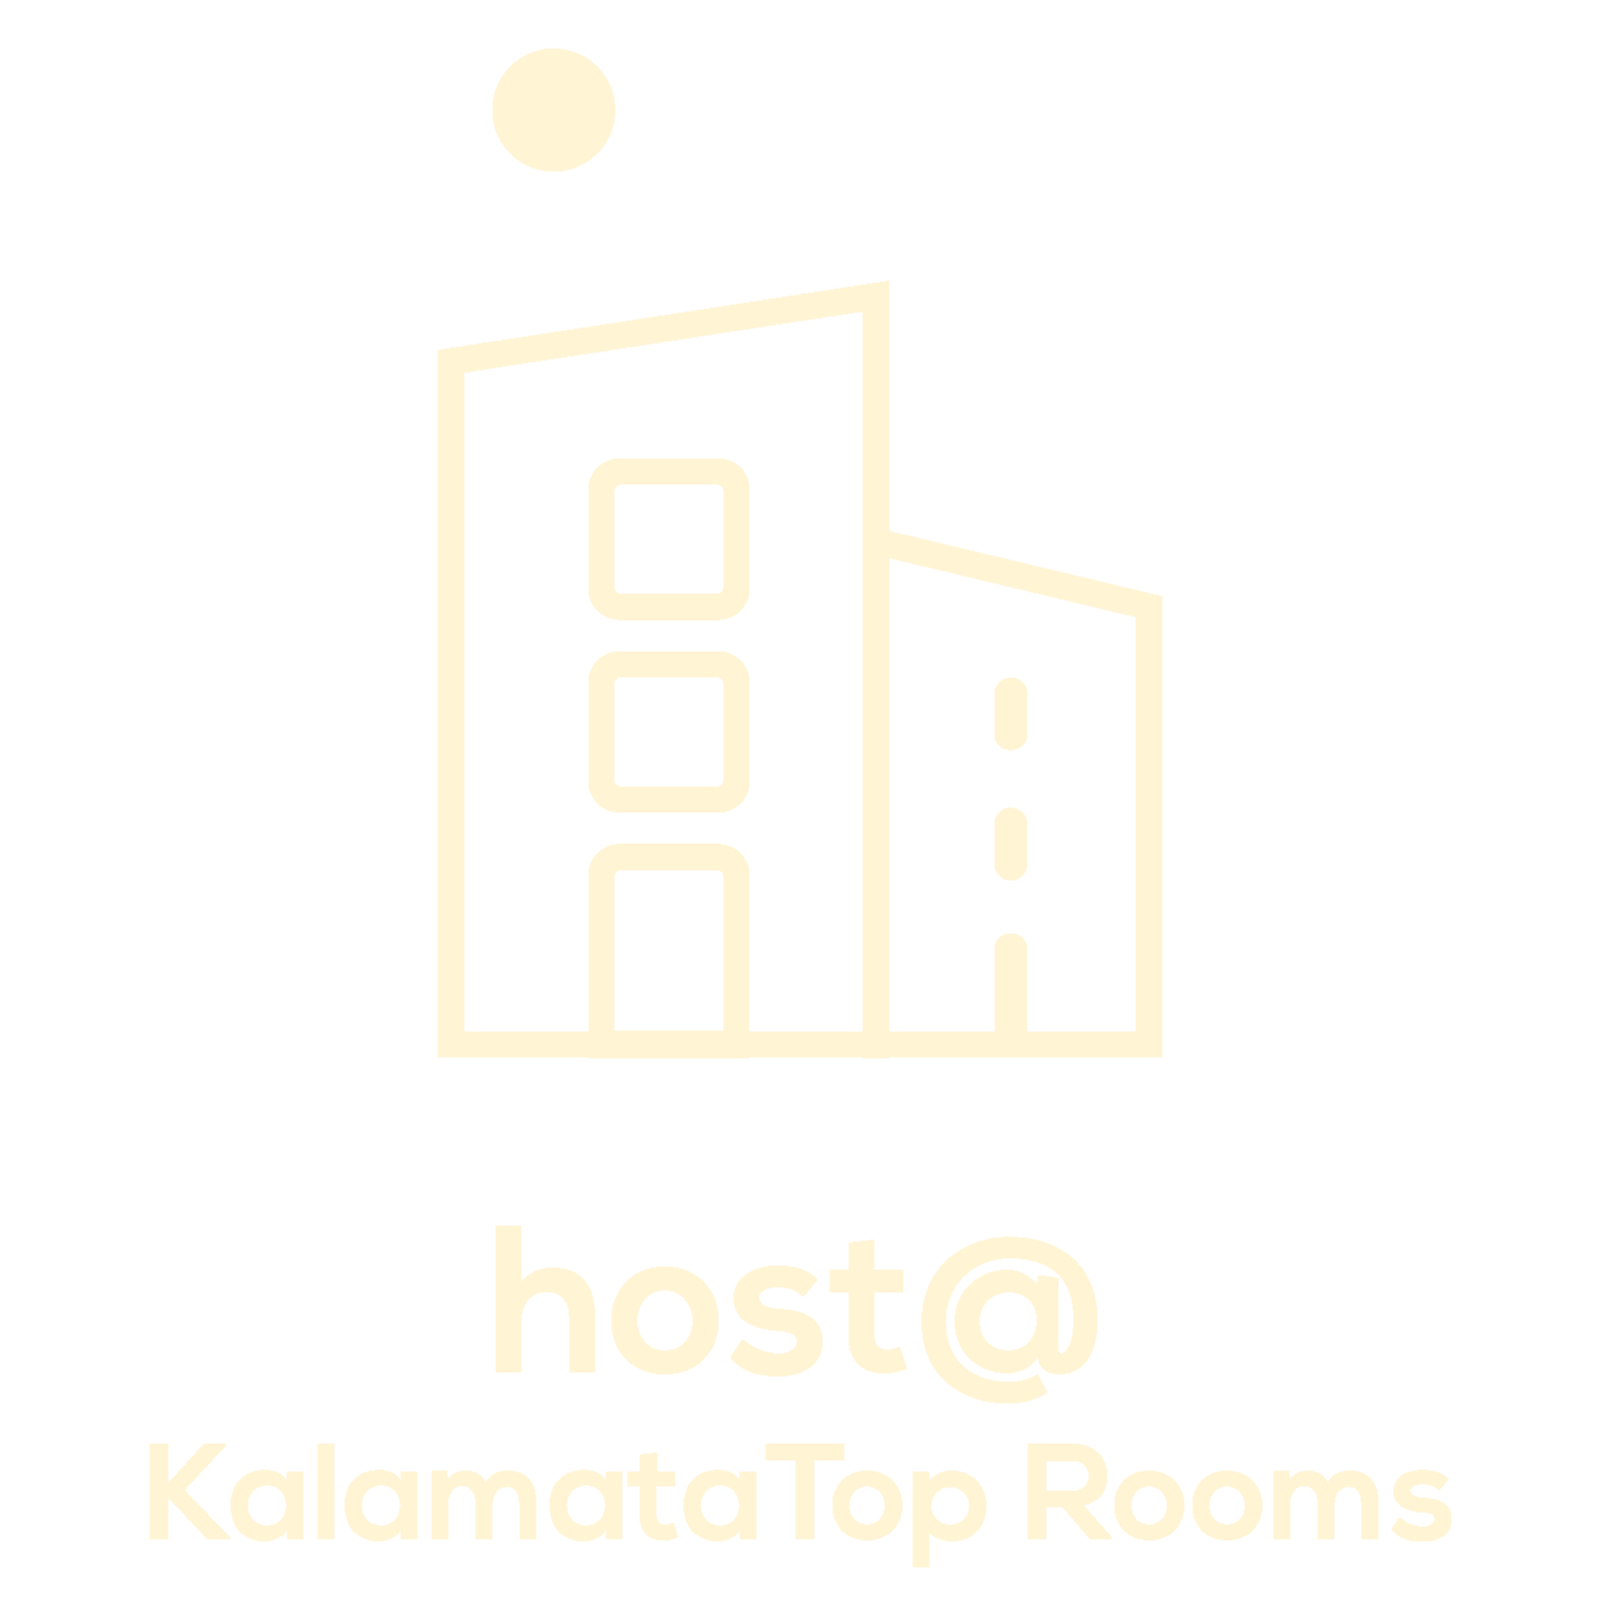 host@Kalamata Top Rooms Logo with sign text color FFF4D3 transparent with small margin